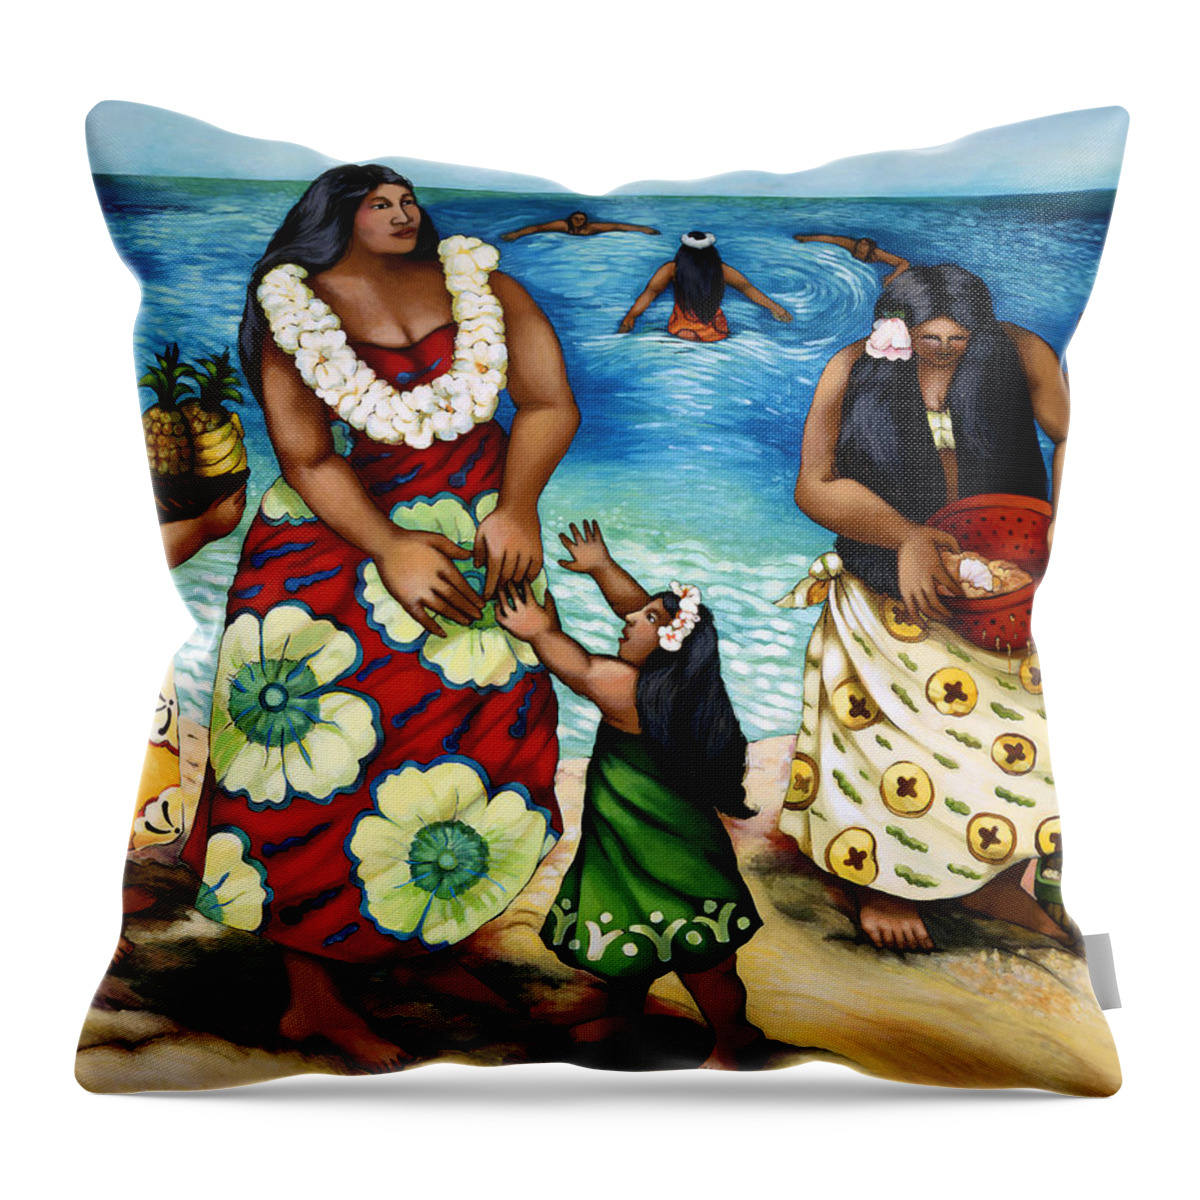 Hula Throw Pillow featuring the painting Island Song by Linda Carter Holman